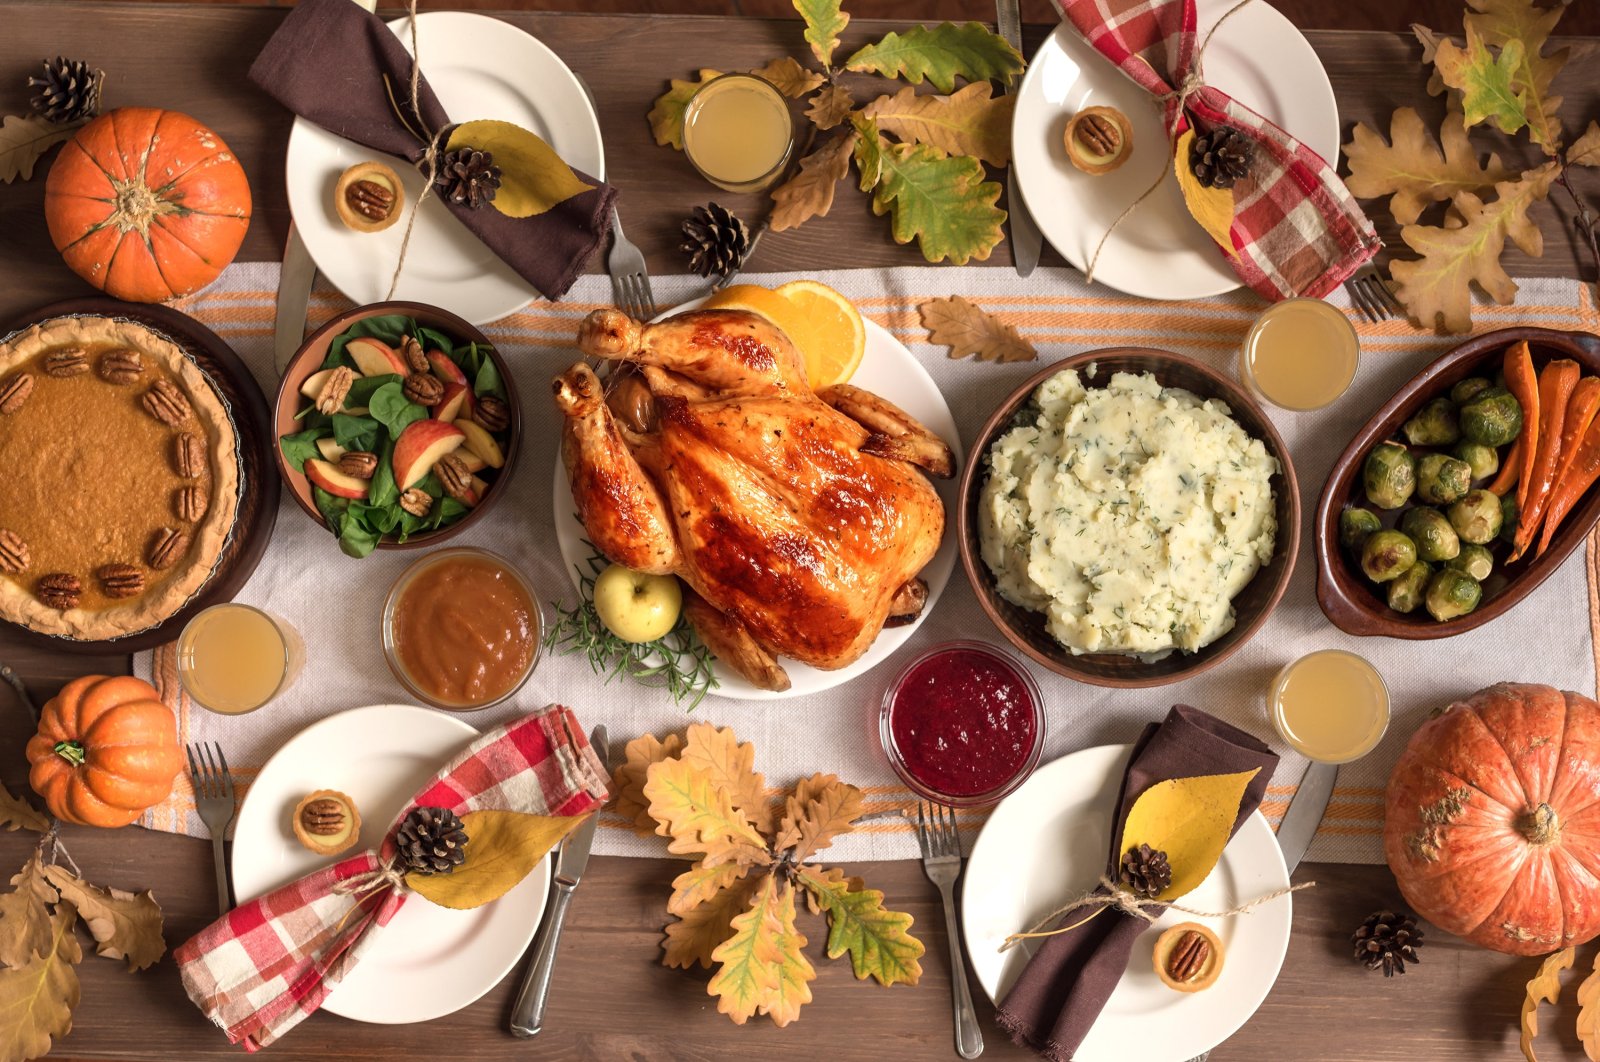 Go with some roasted turkey or chicken, two sides and a dessert for an intimate celebration of Thanksgiving. (Shutterstock Photo)